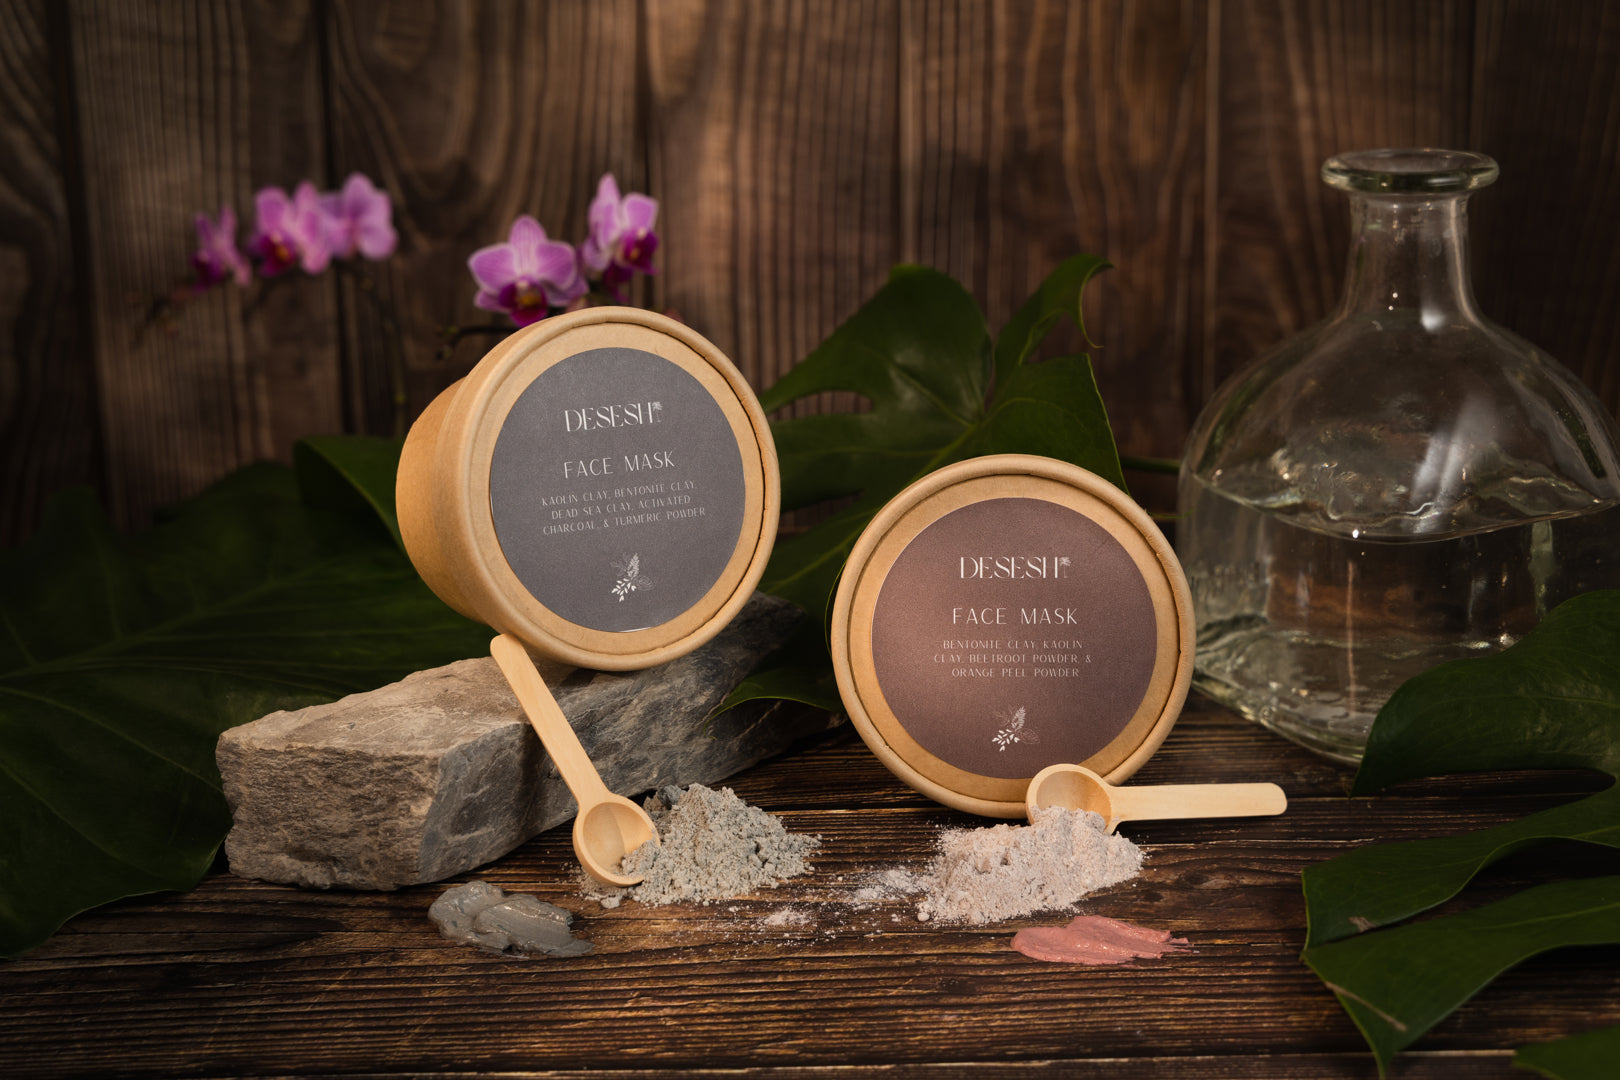 This image shows the Desesh US-made spa quality mineral face mask powder as an alternative to single use face mask sheets for a more environmentally friendly zero waste plastic free self care face mask routine. The image shows both of the Desesh mineral face mask products in a stylized setting with plants and natural materials 